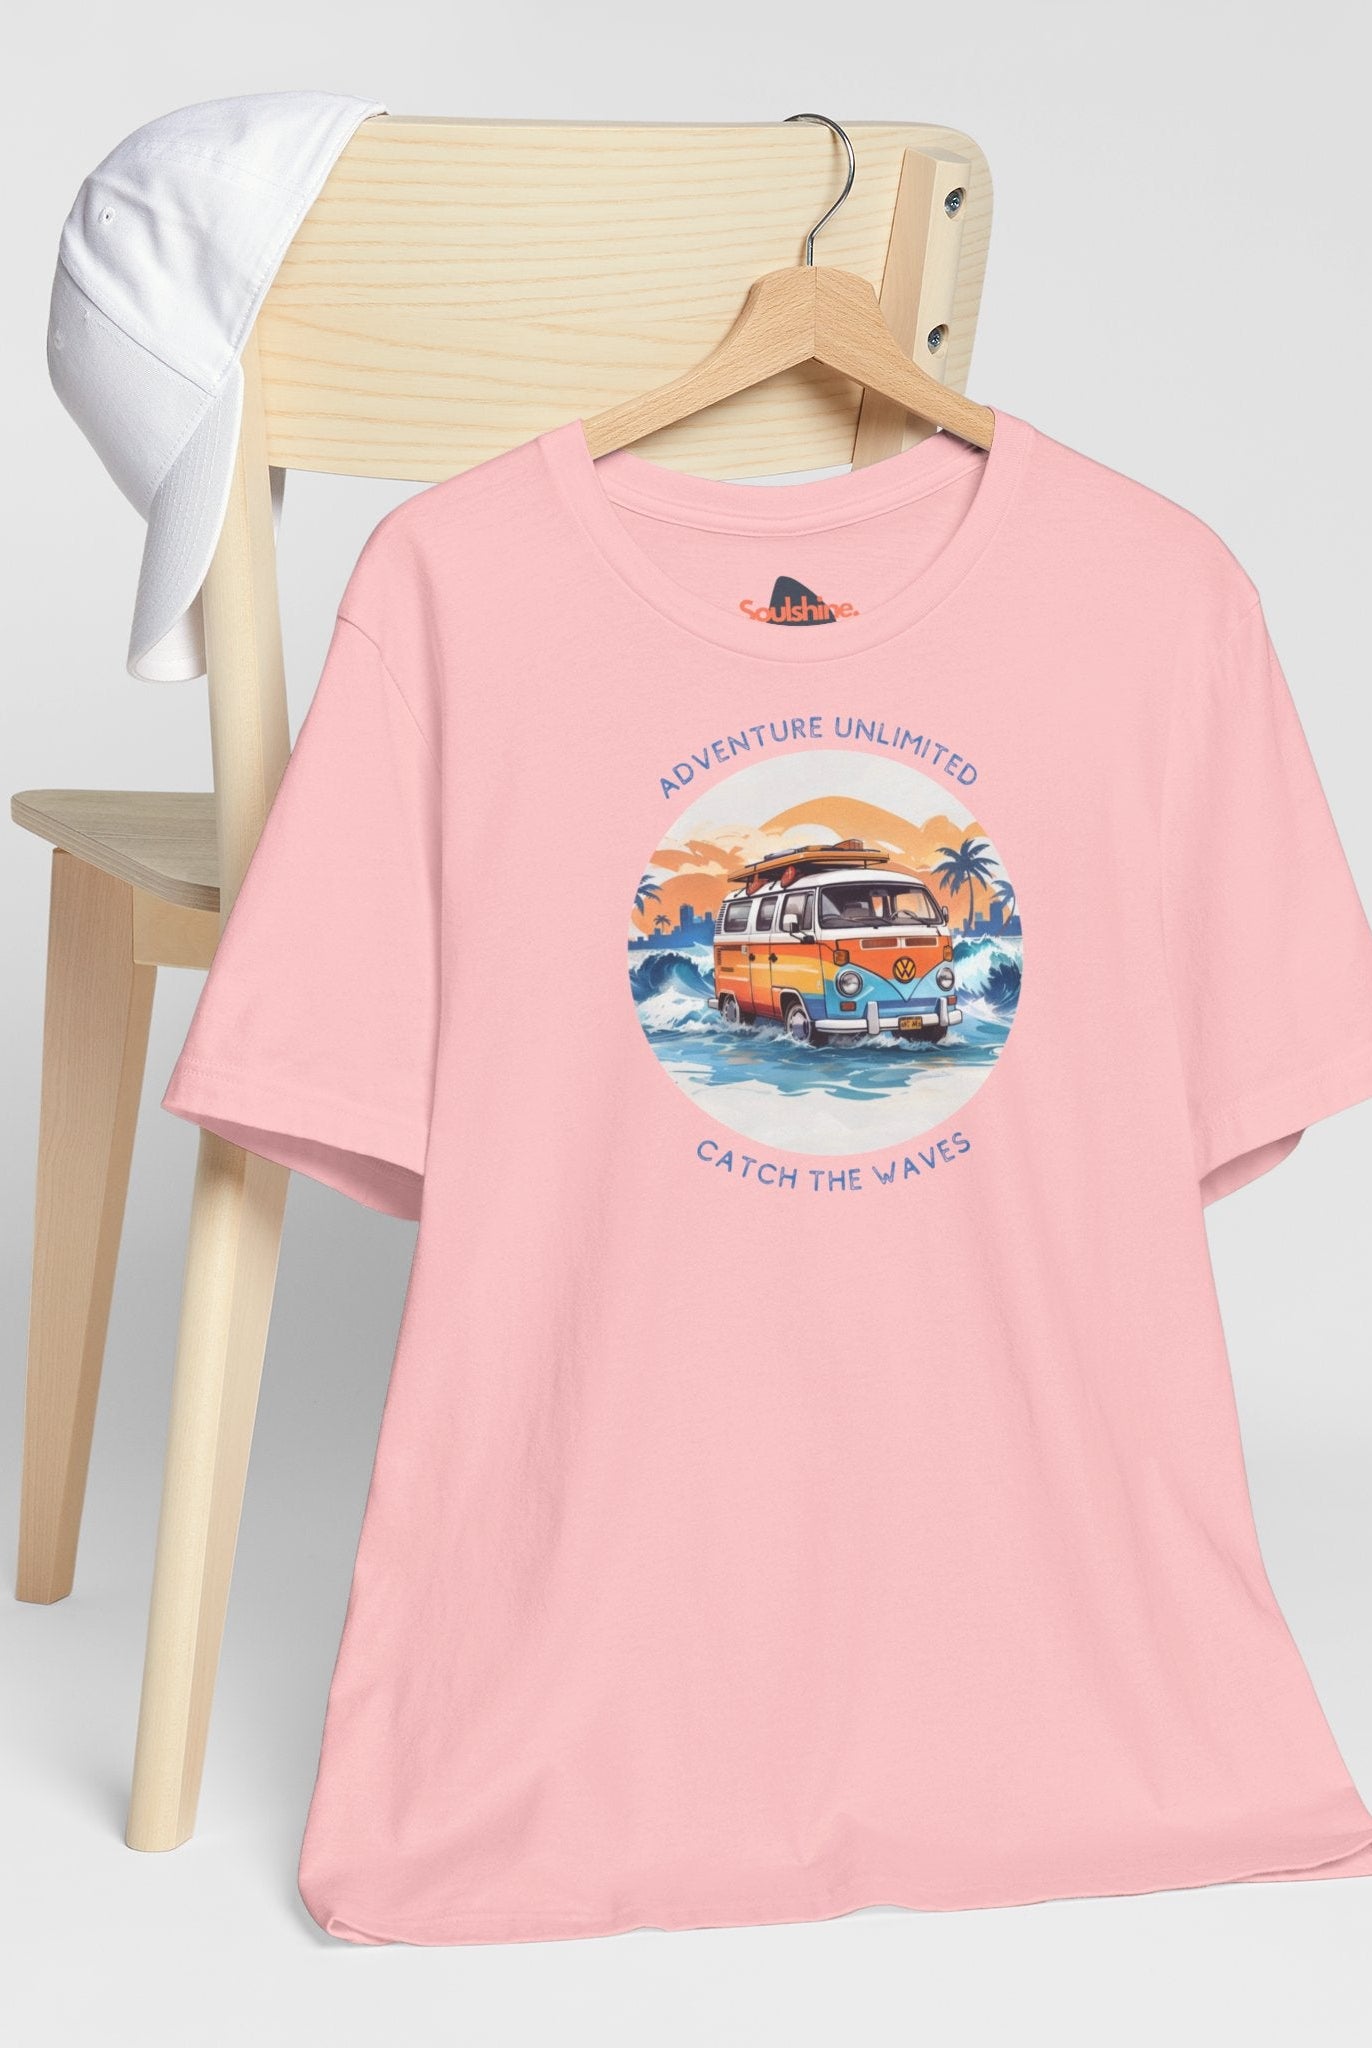 Adventure Unlimited Surfing T-Shirt with Van and Surfboard Graphic - Direct-to-Garment Printed Item